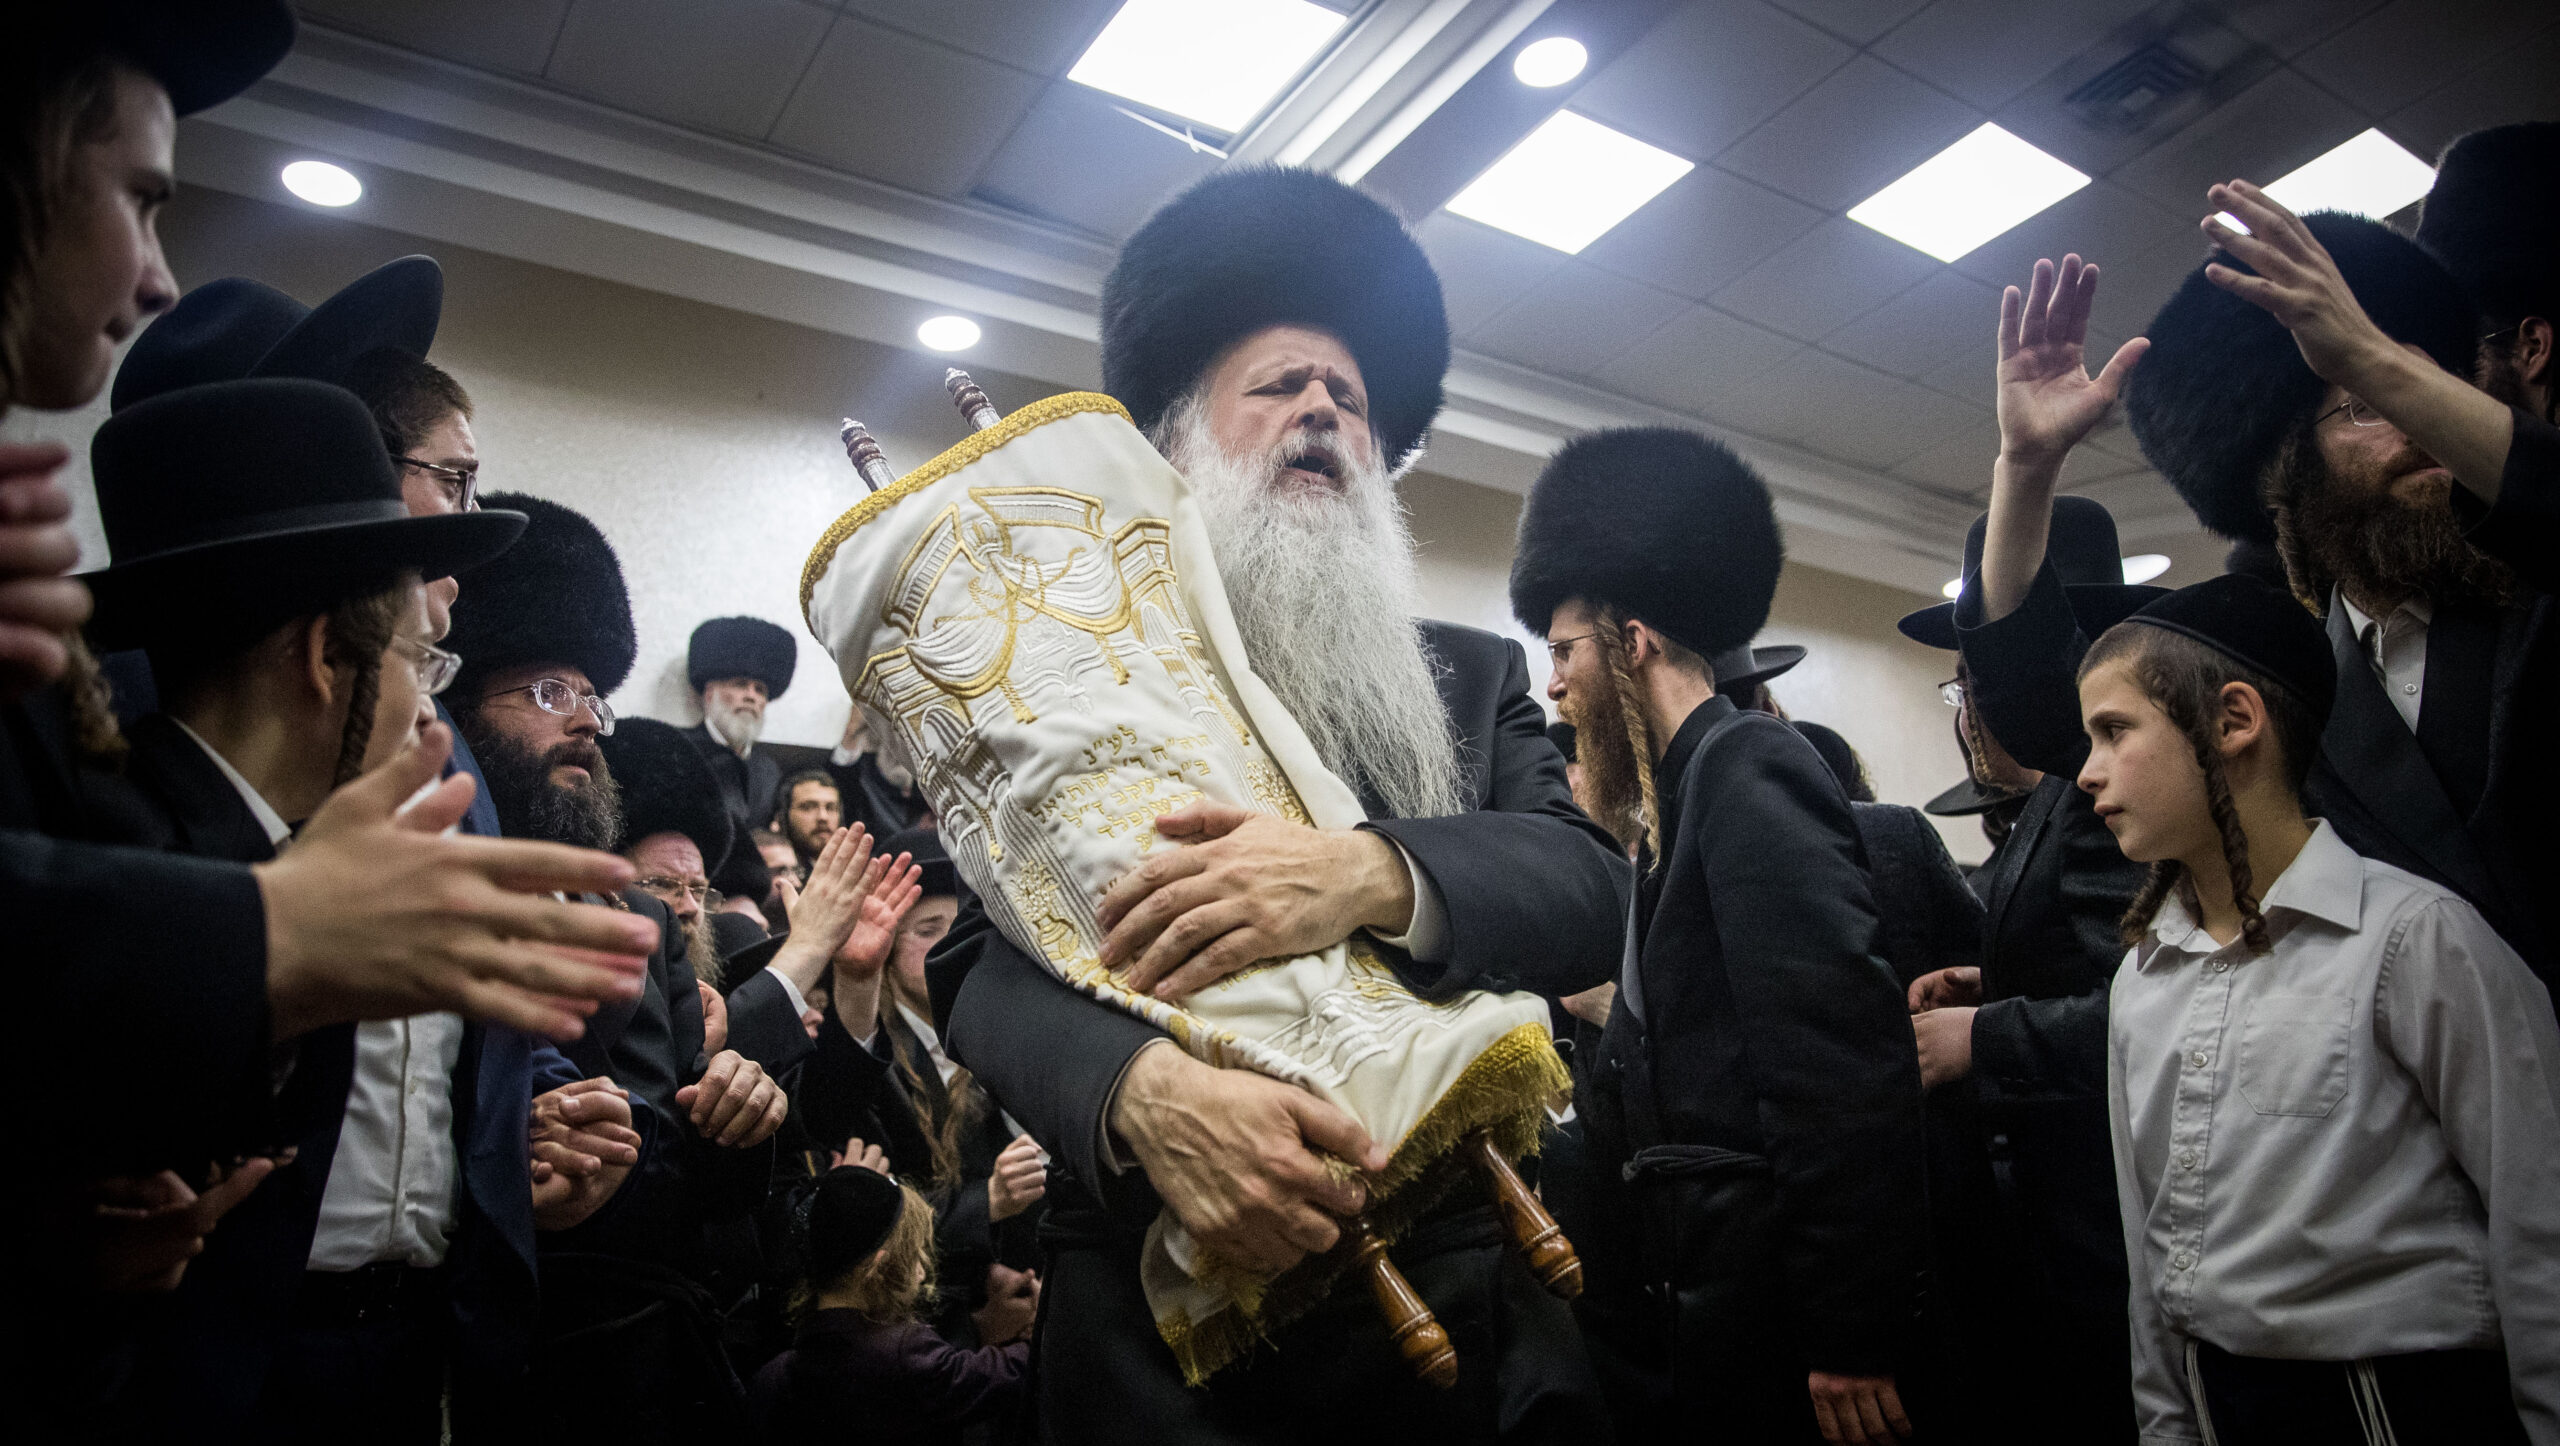 In Israel, a Hasidic dynasty’s rivalry erupts into violence